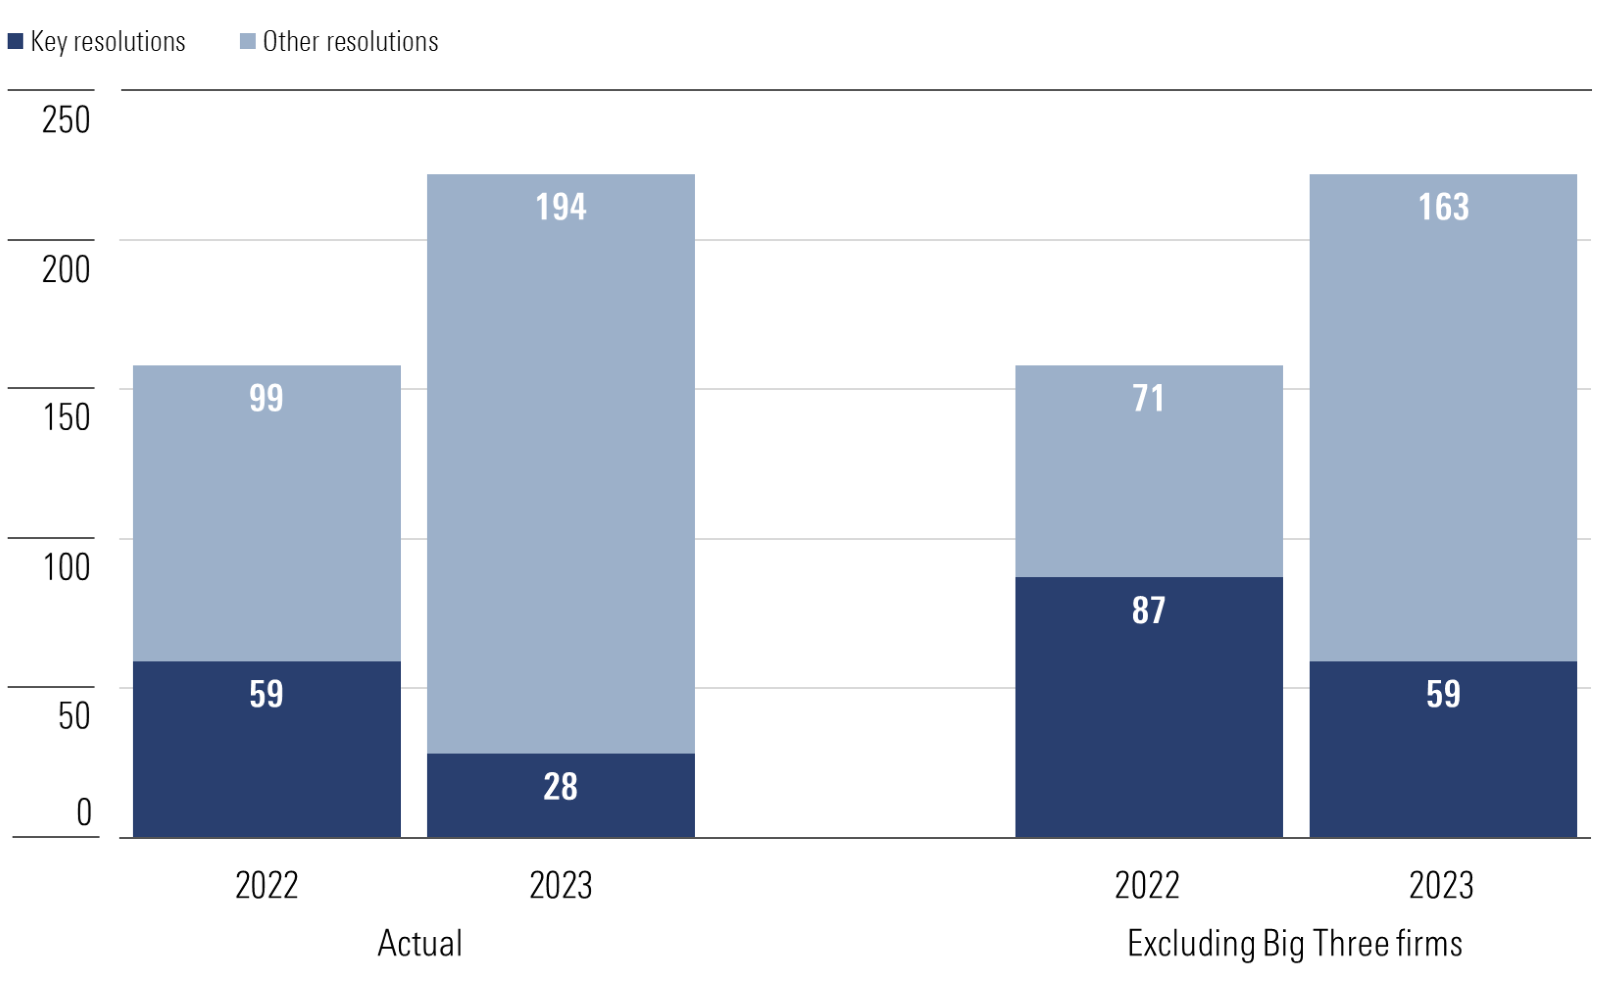 Chart showing the actual number of environmental and social shareholder resolutions at S&P 100 constituents in the 2022 and 2023 proxy years, and a scenario excluding BlackRock, Vanguard, and State Street's votes.